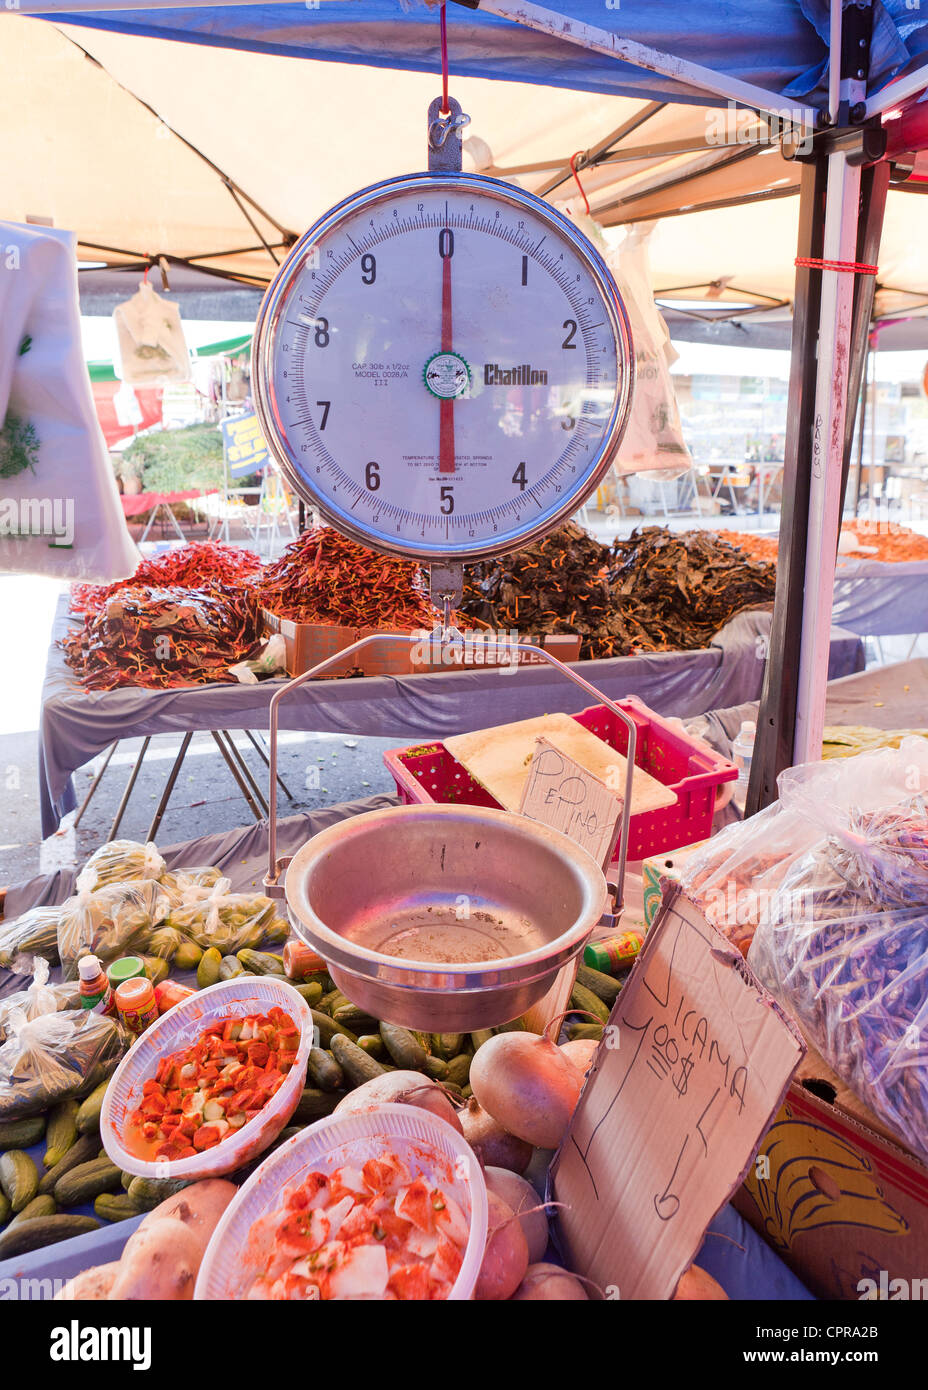 An analog dial scale at an outdoor market Stock Photo